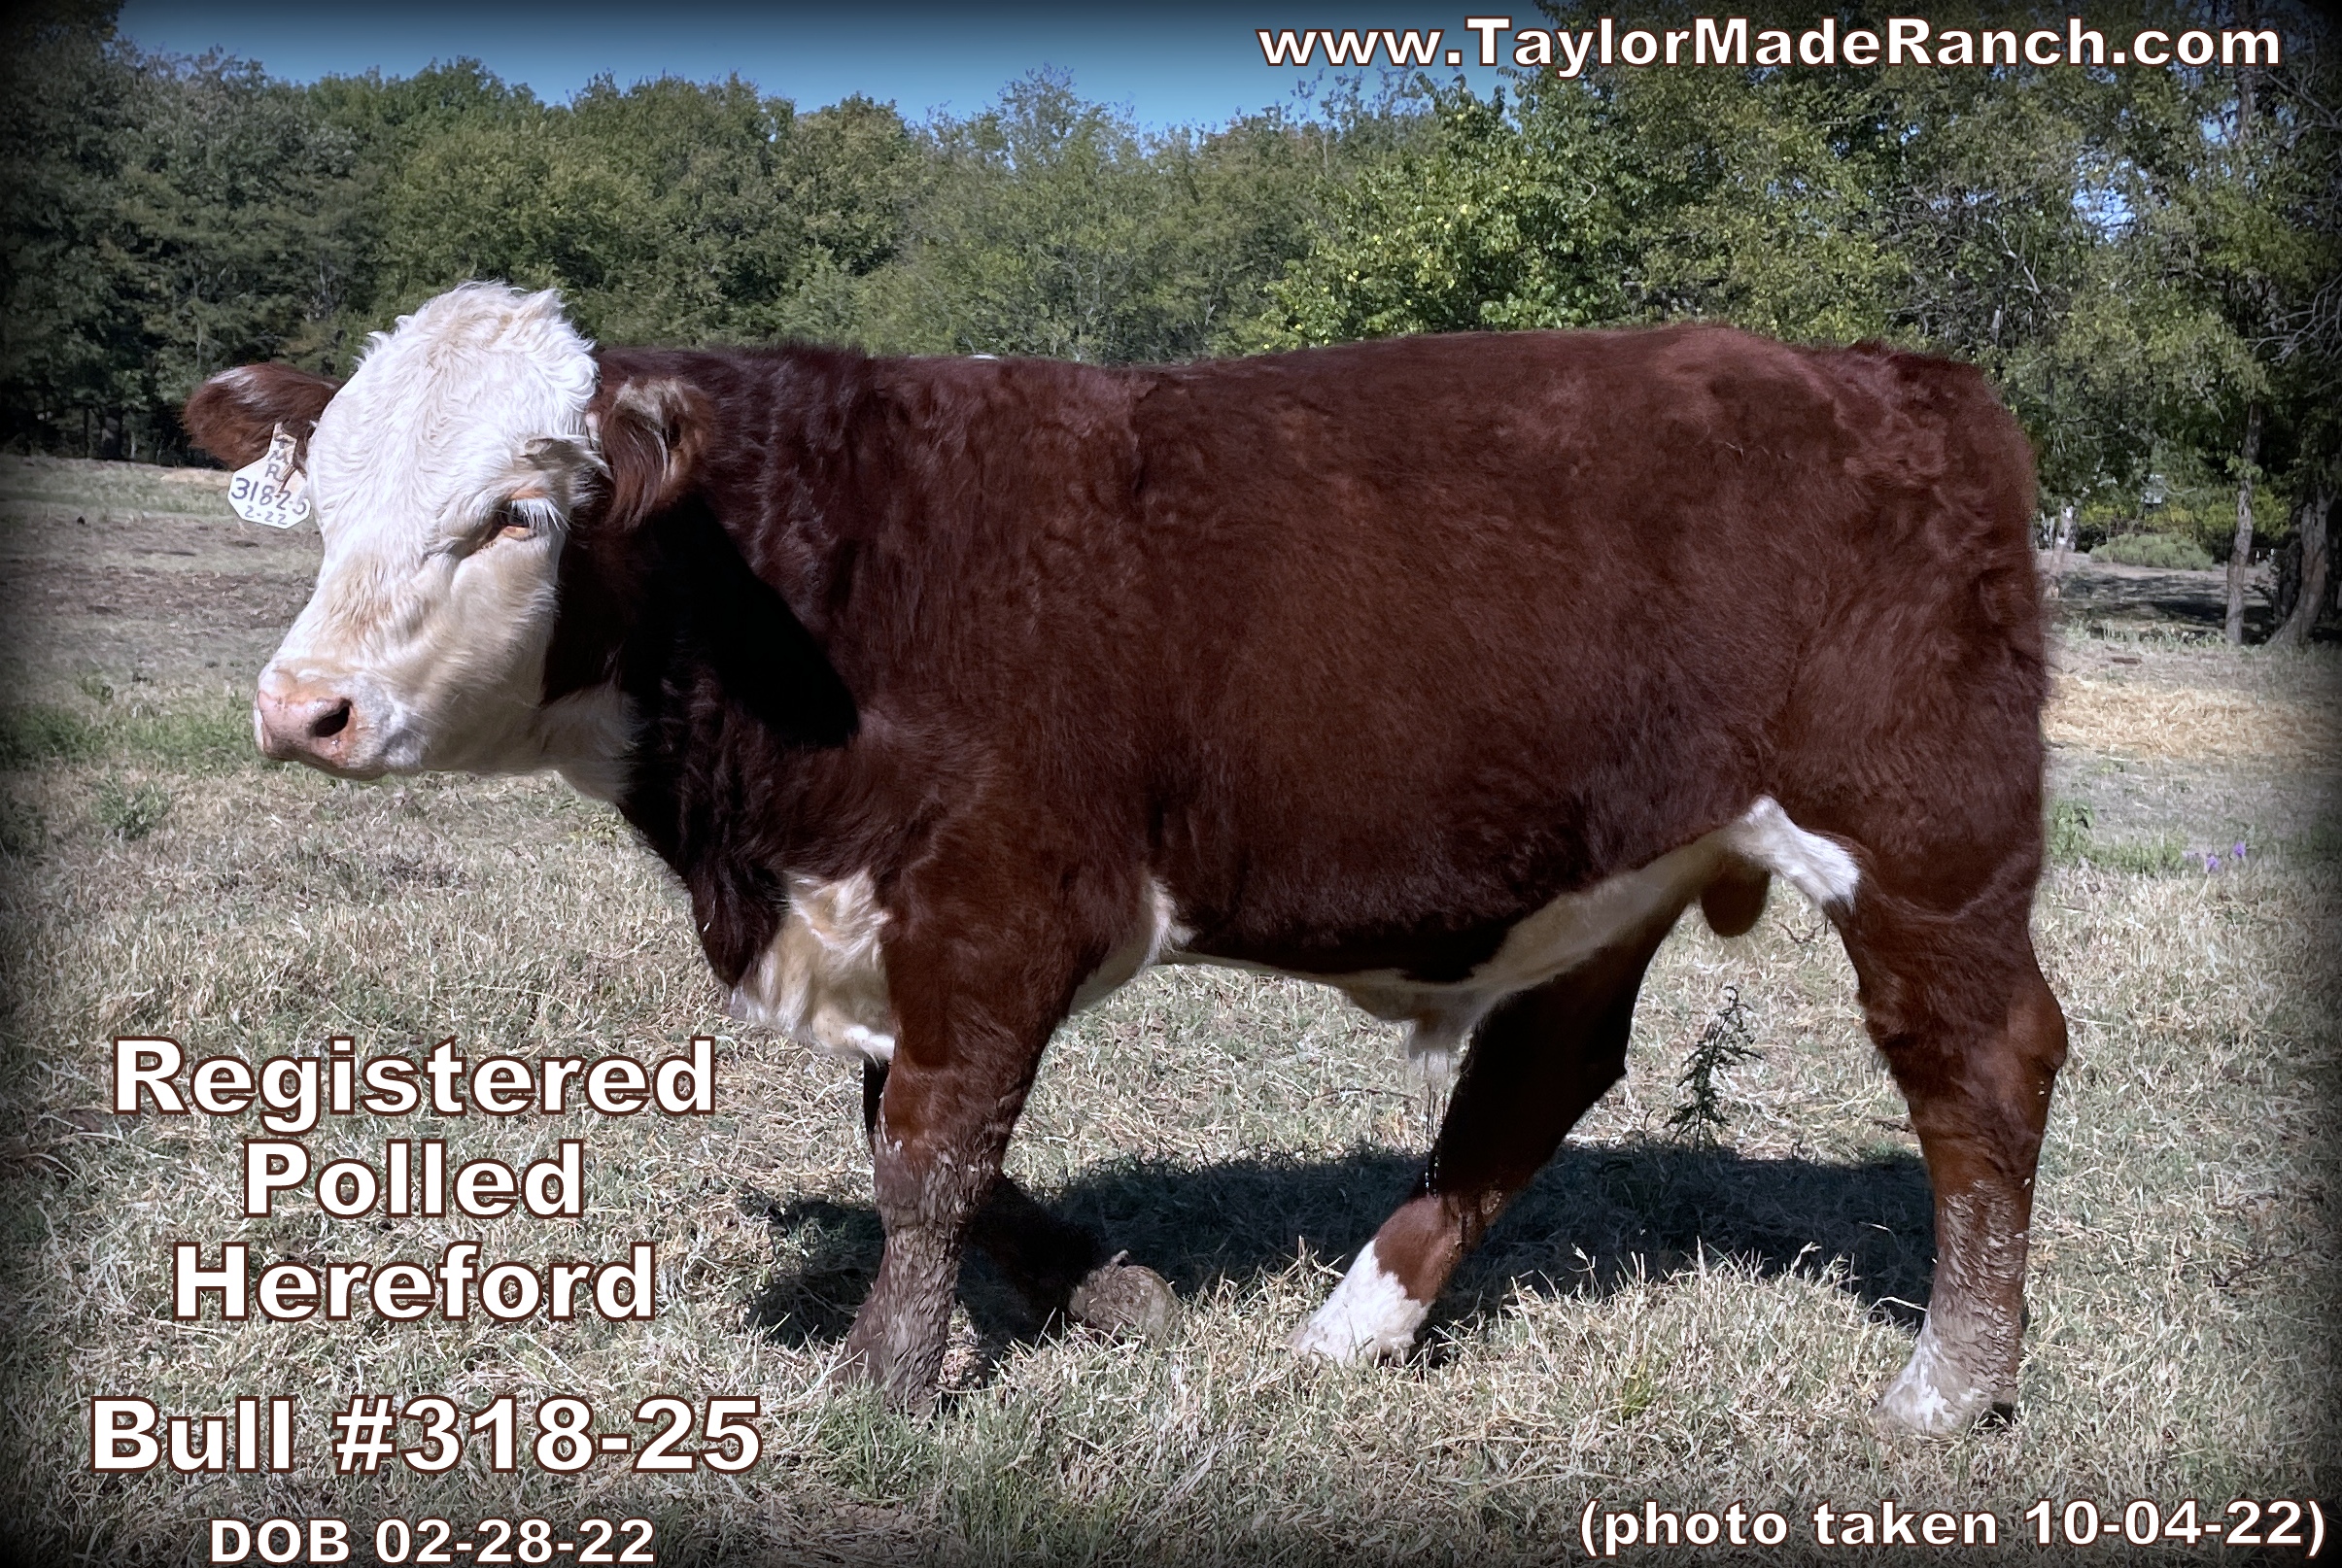 Registered Polled Hereford bull #318-25 - DOB 02-28-22 in Northeast Texas #TaylorMadeRanch